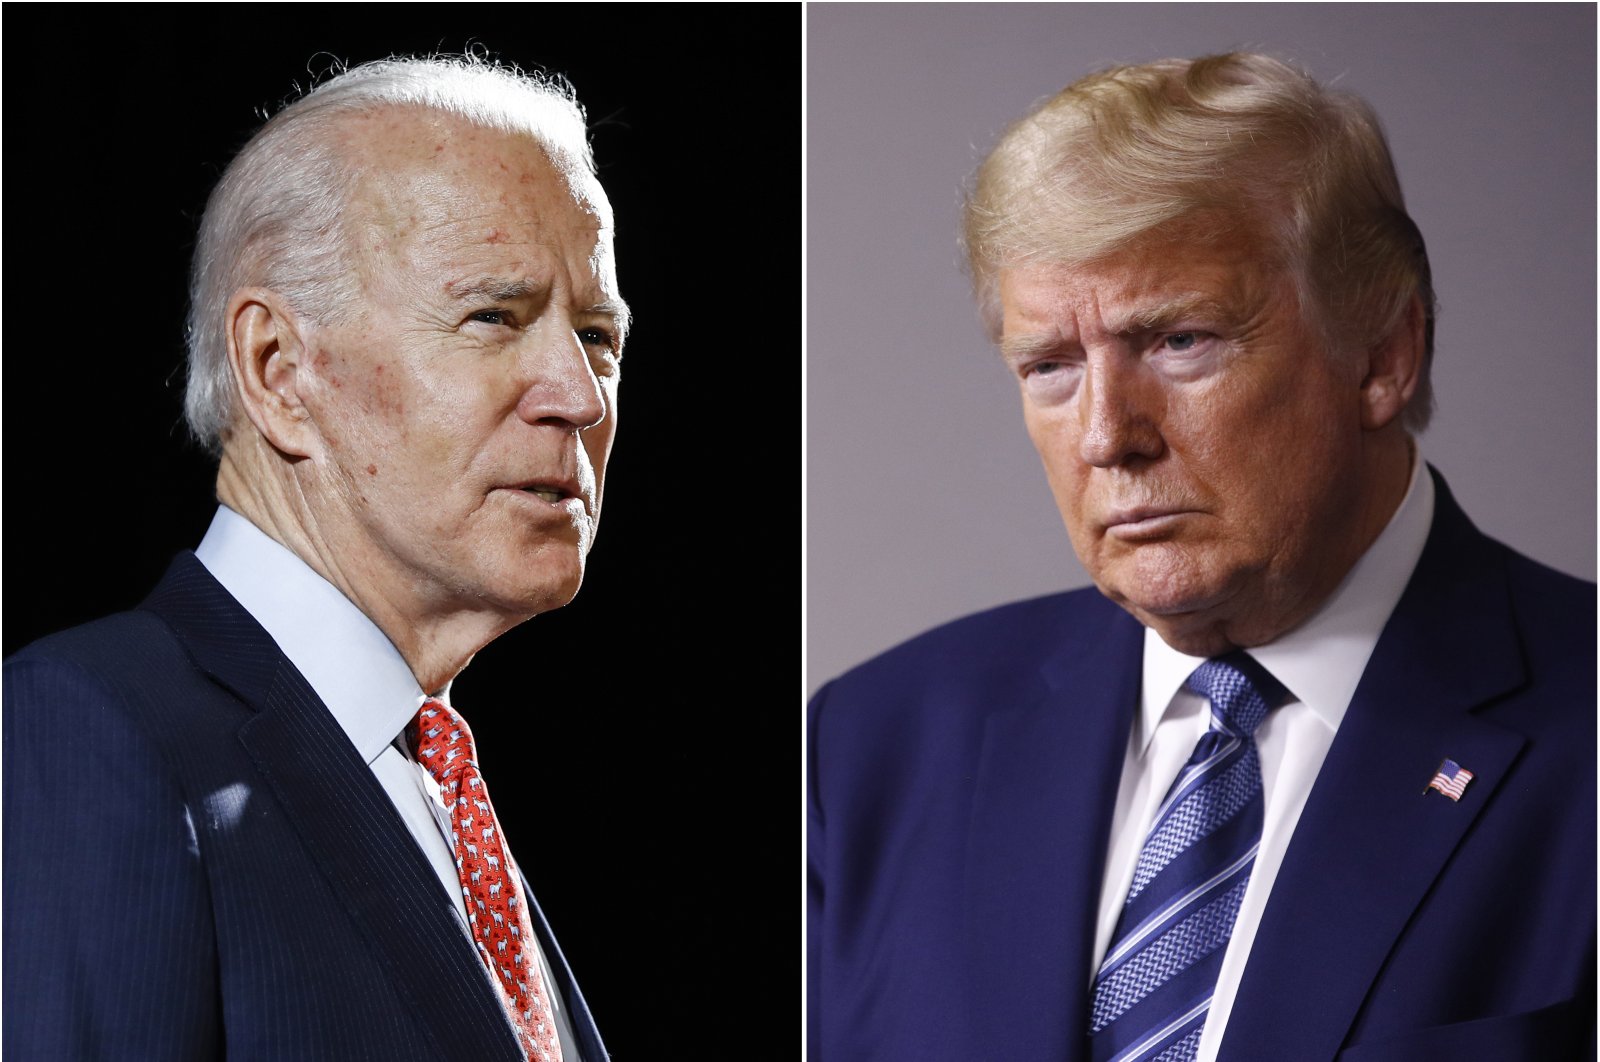 In this combination of file photos, former Vice President Joe Biden speaks in Wilmington, Del., on March 12, 2020, and President Donald Trump speaks at the White House in Washington on April 5, 2020. (AP Photo)